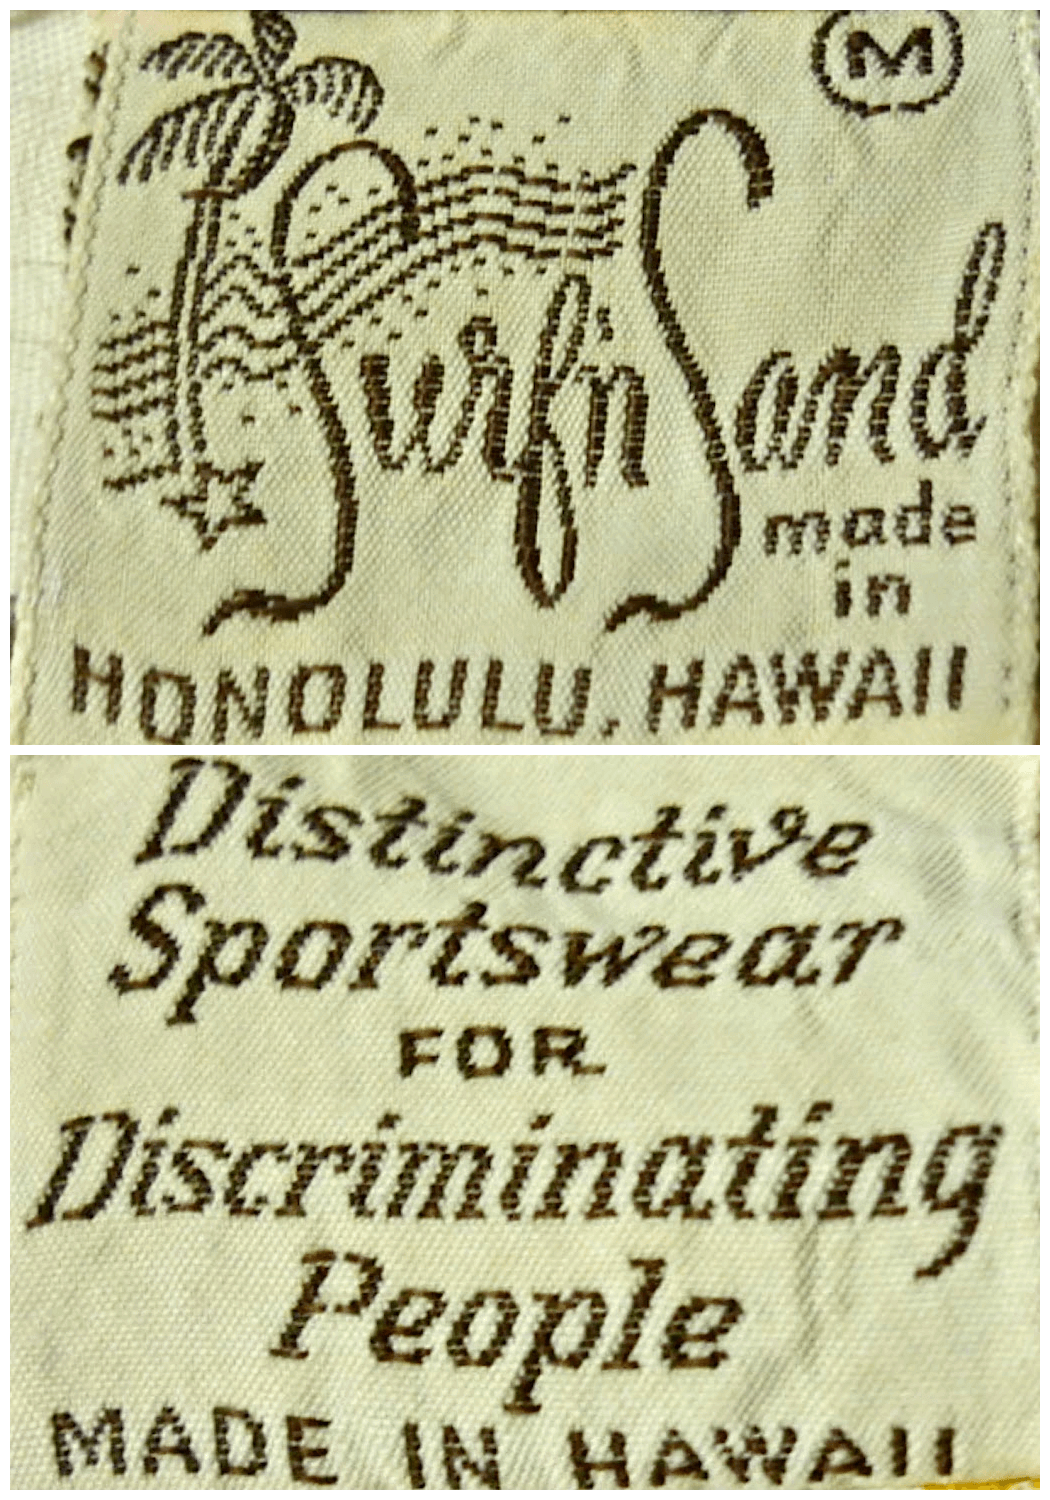 from a 1950s Hawaiian shirt (front and reverse) - Courtesy of FabGear Vintage